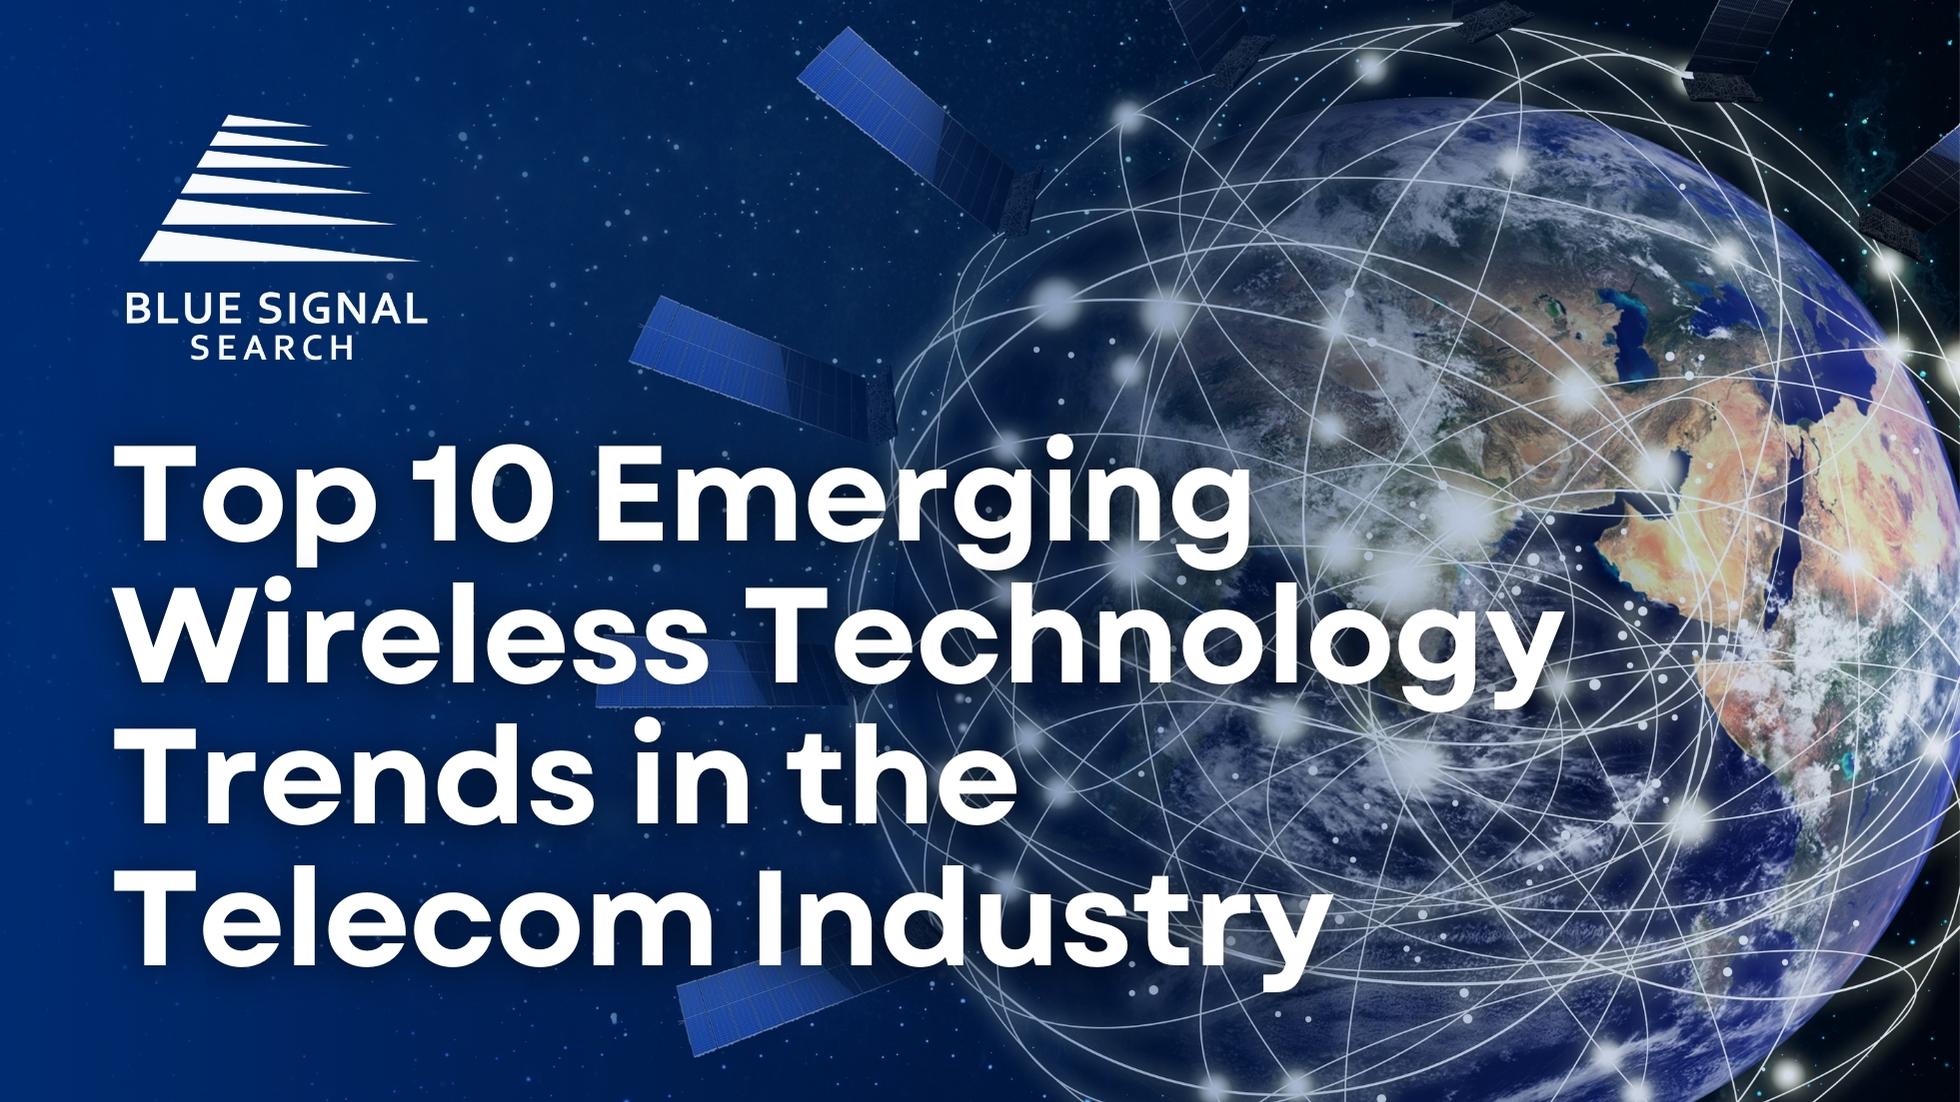 Earth surrounded by lines and dots to imply networking with text overlay Top 10 Emerging Wireless Technology Trends in the Telecom Industry and Blue Signal Search logo